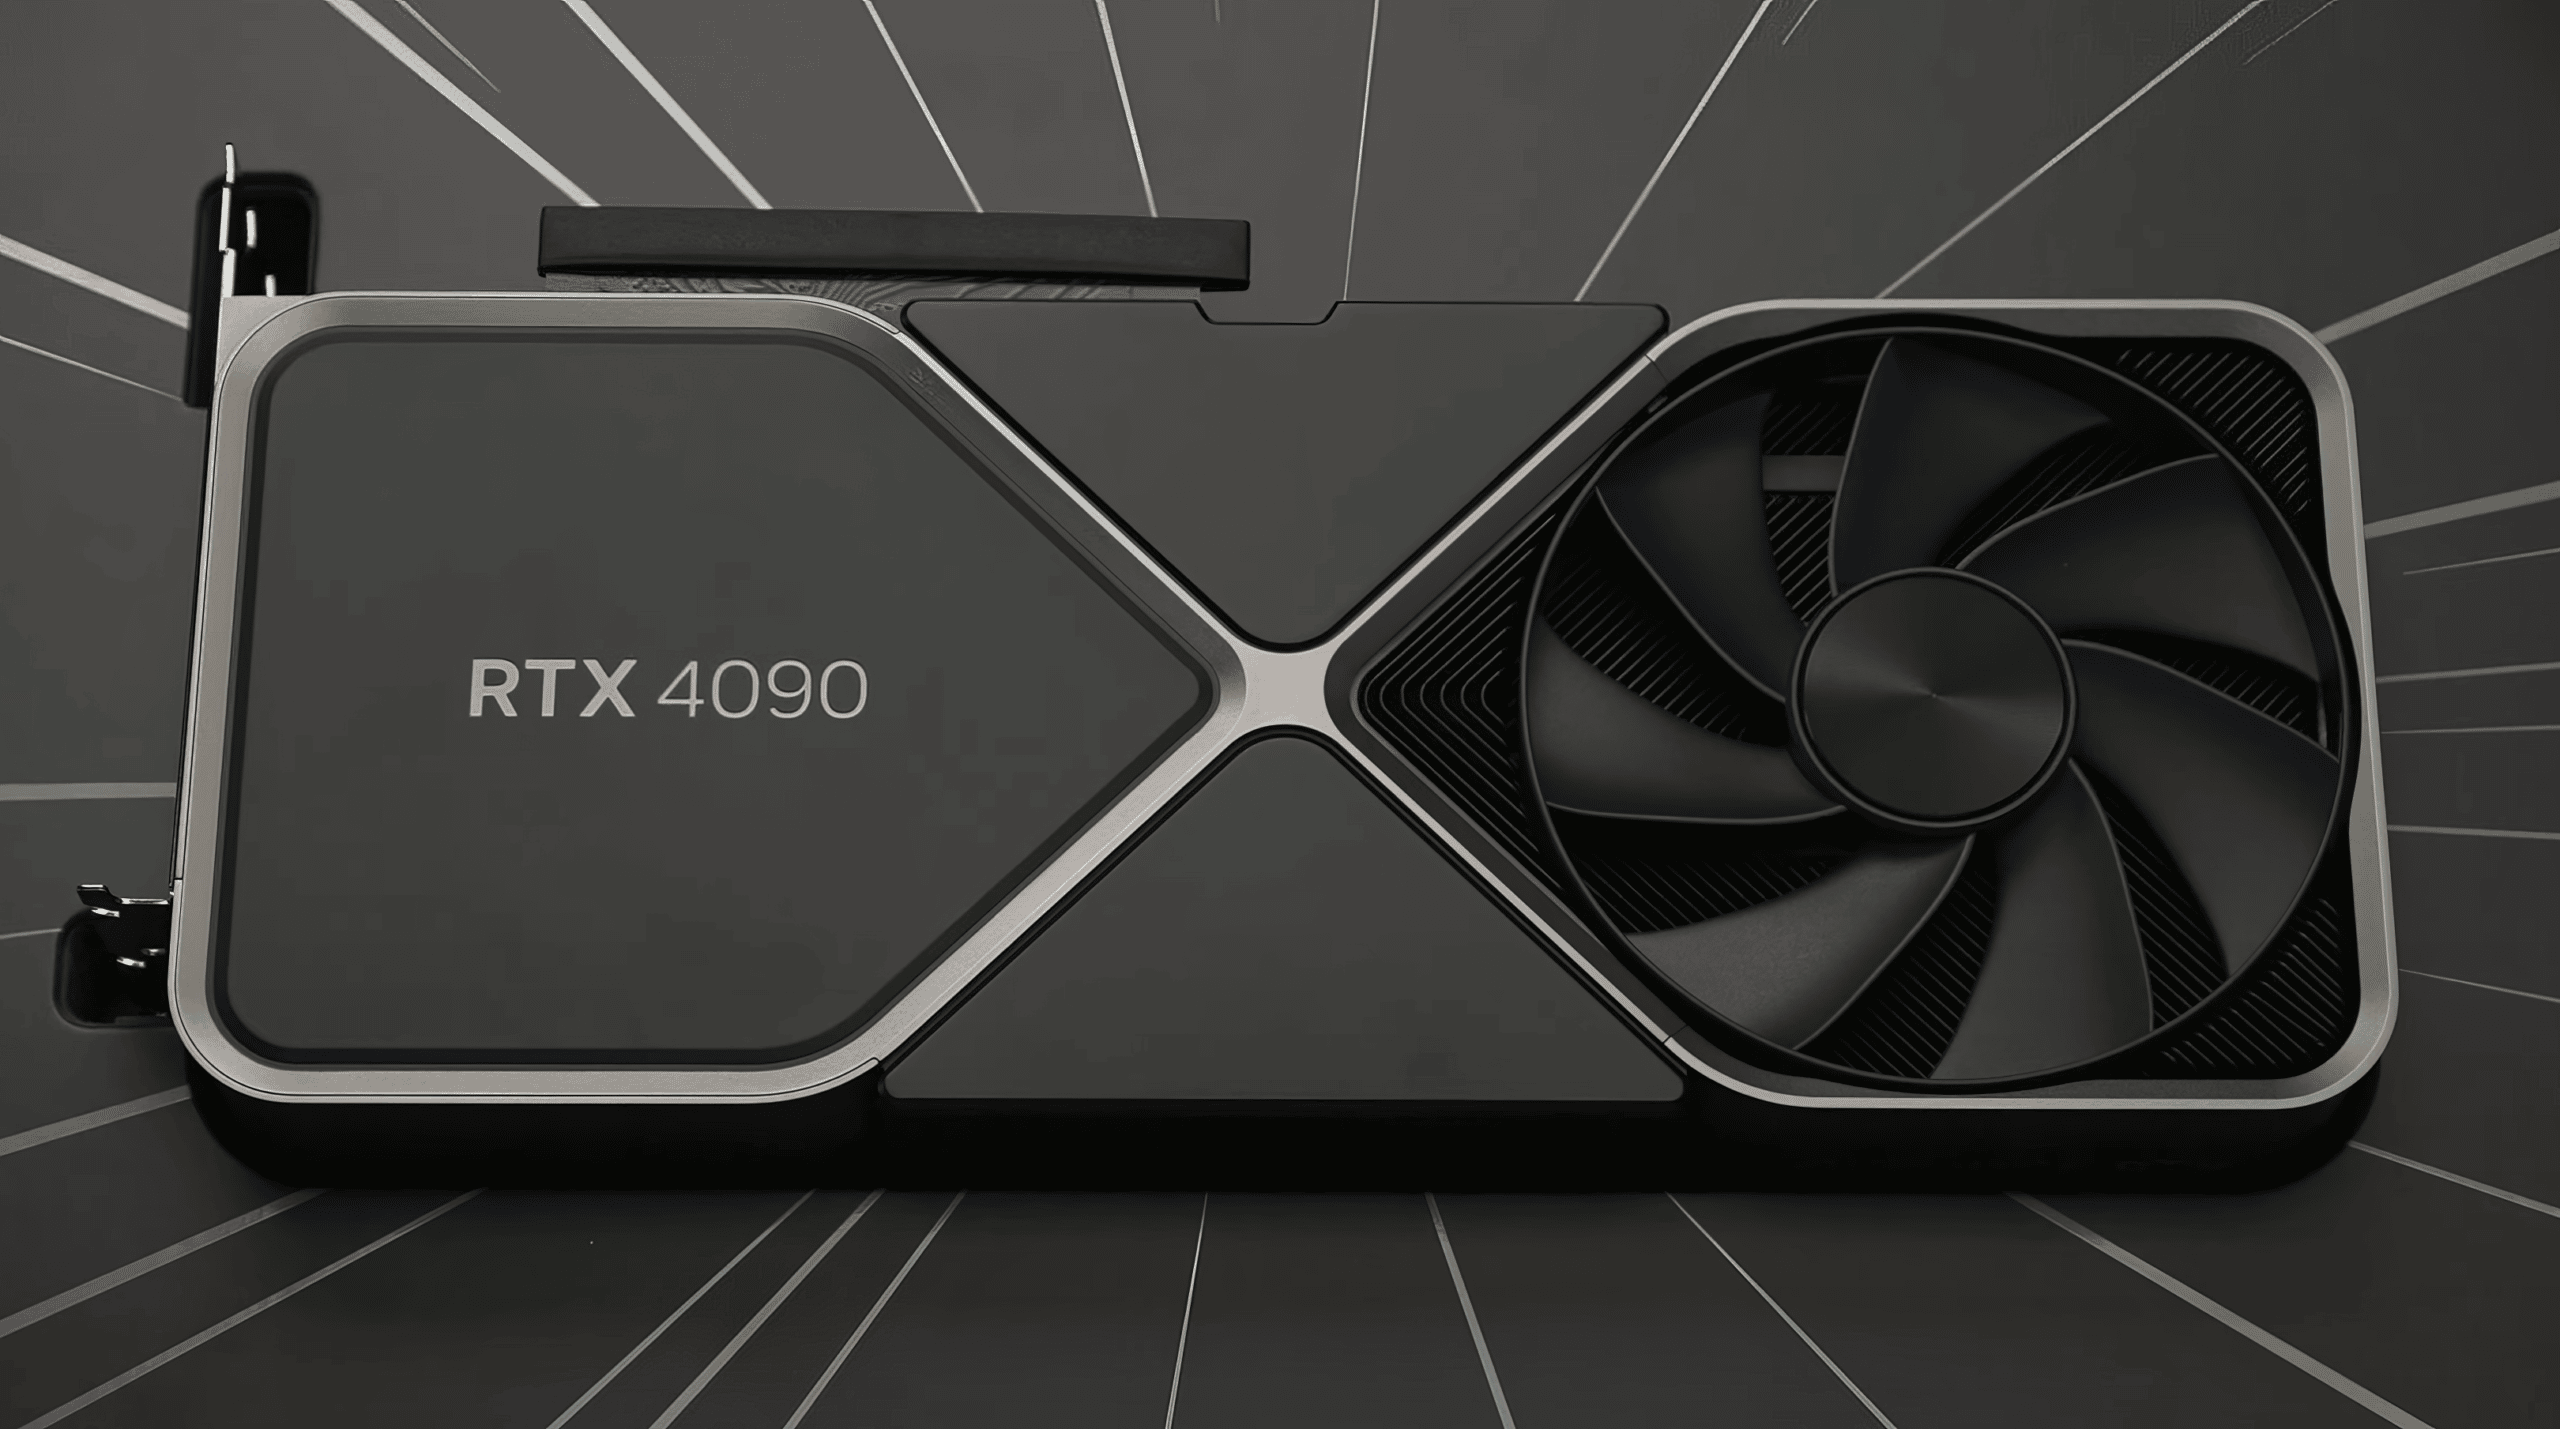 The RTX 4090 is one of the most powerful cards right now.